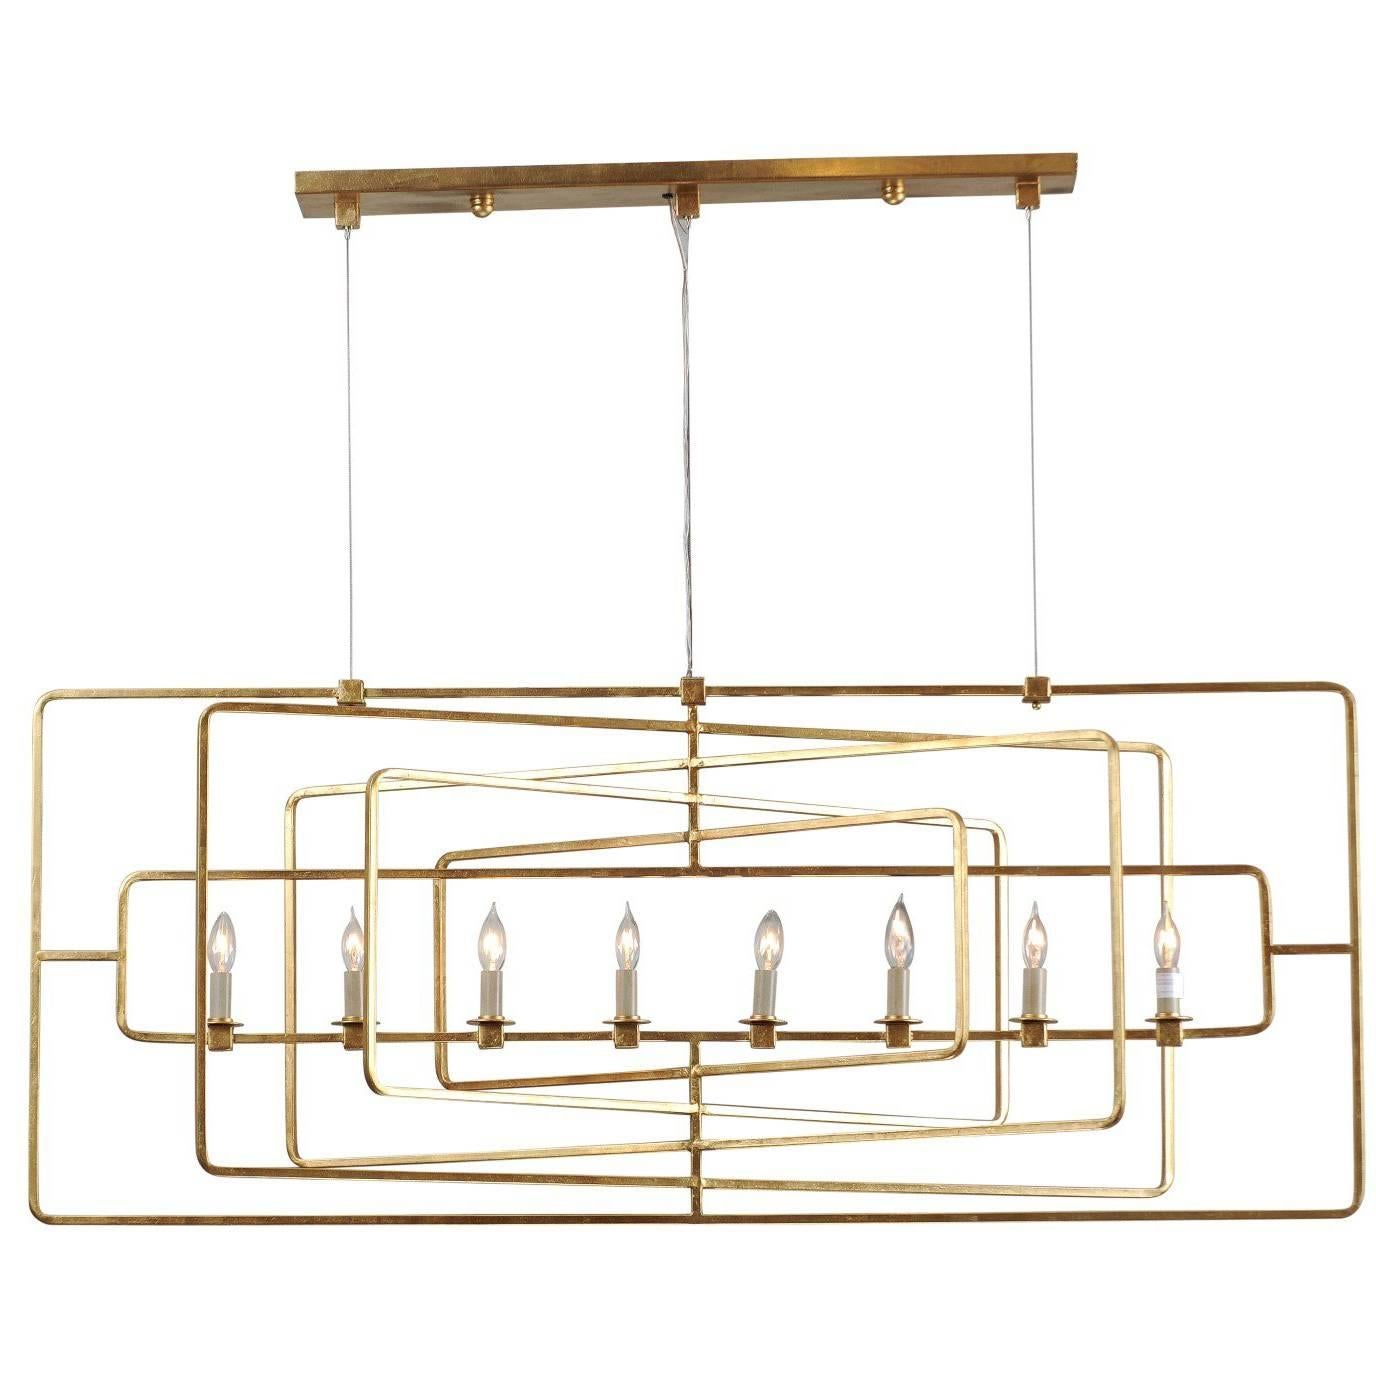 Gilded Eight-Light Wrought-Iron Chandelier with Multiple Layered Rectangles